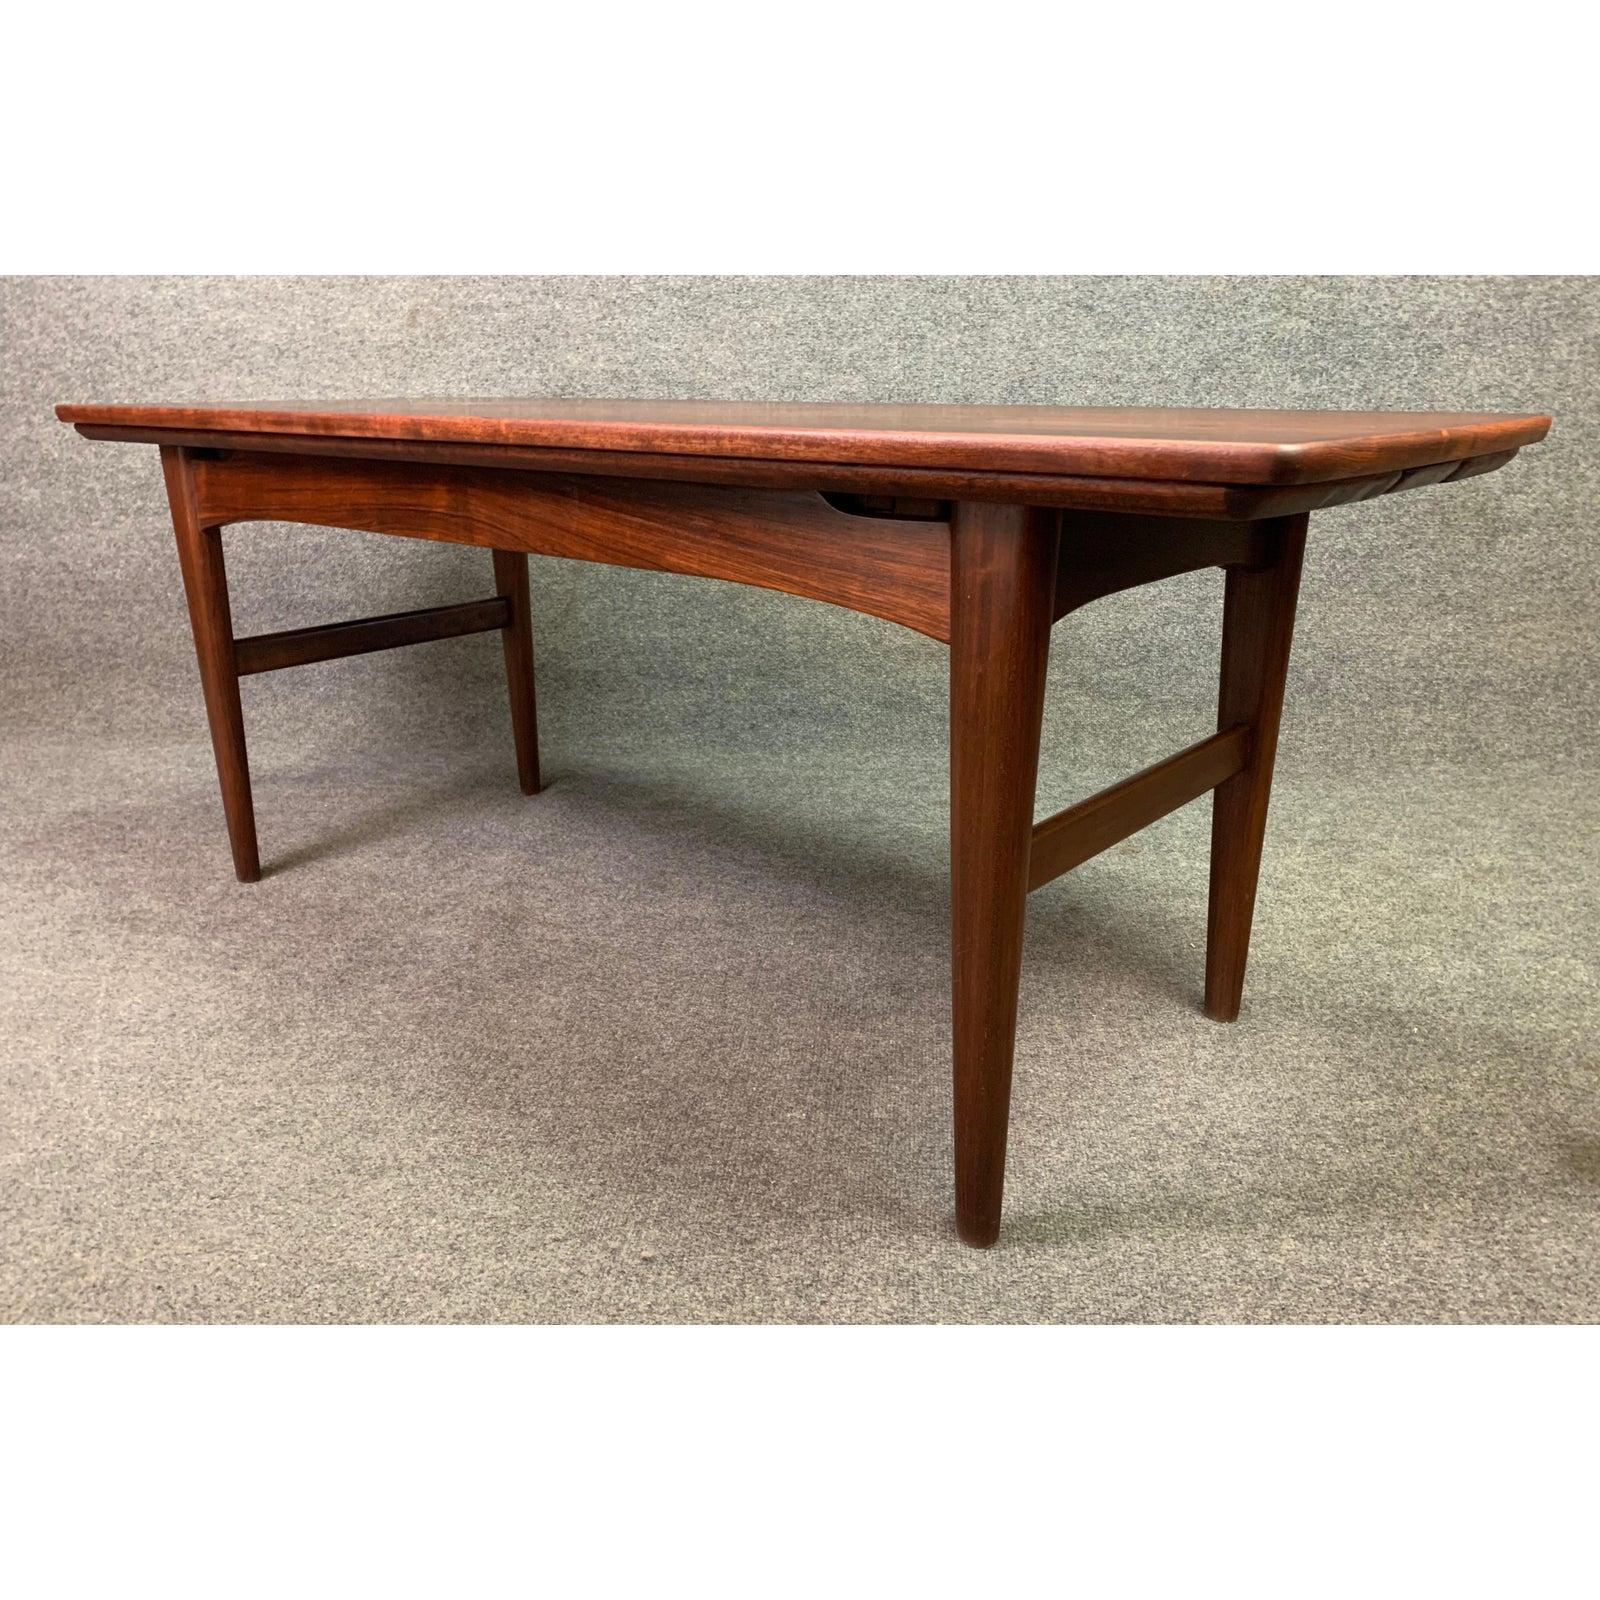 RESERVED FOR NOA: Vintage Danish Mid-Century Modern Rosewood Elevator Table 4